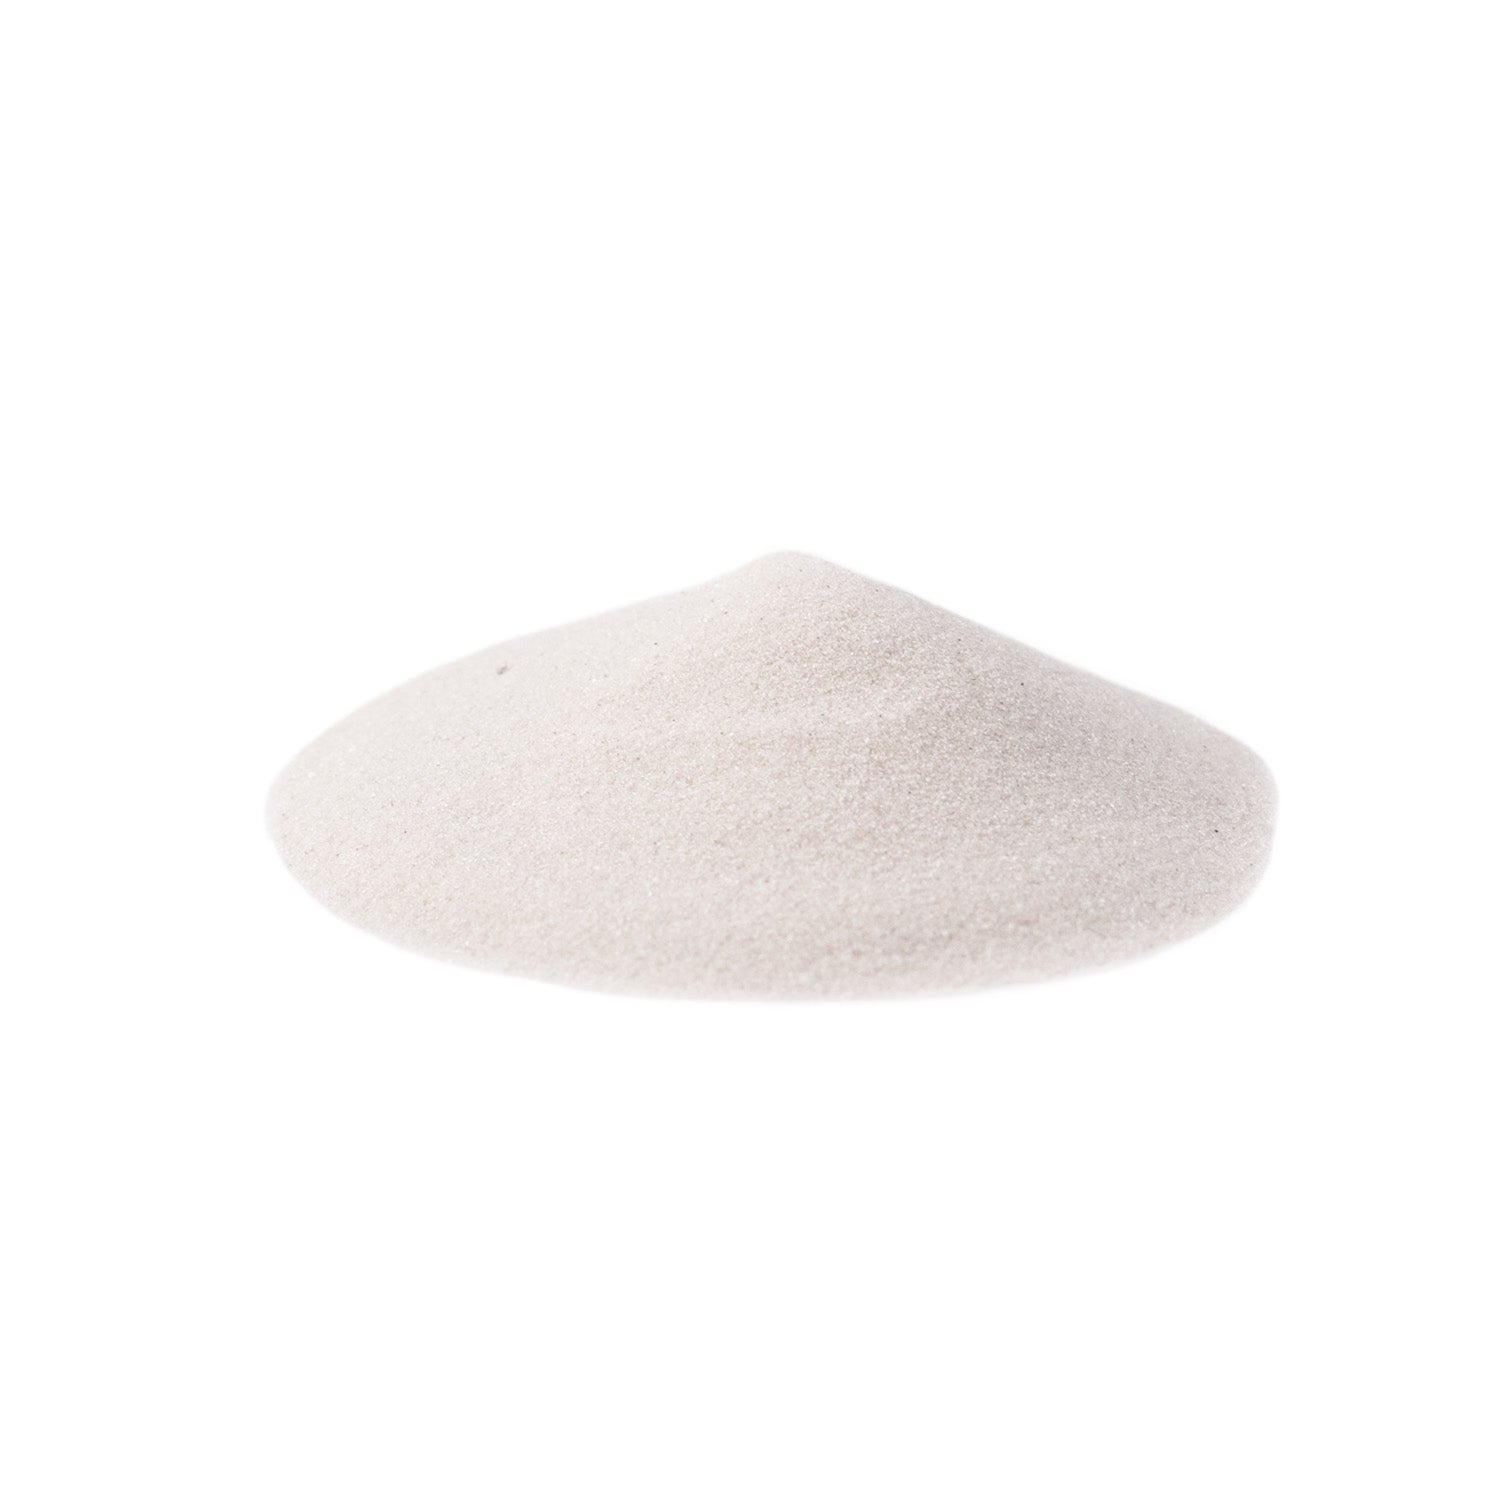 White Sand (250g) - AntKeepers